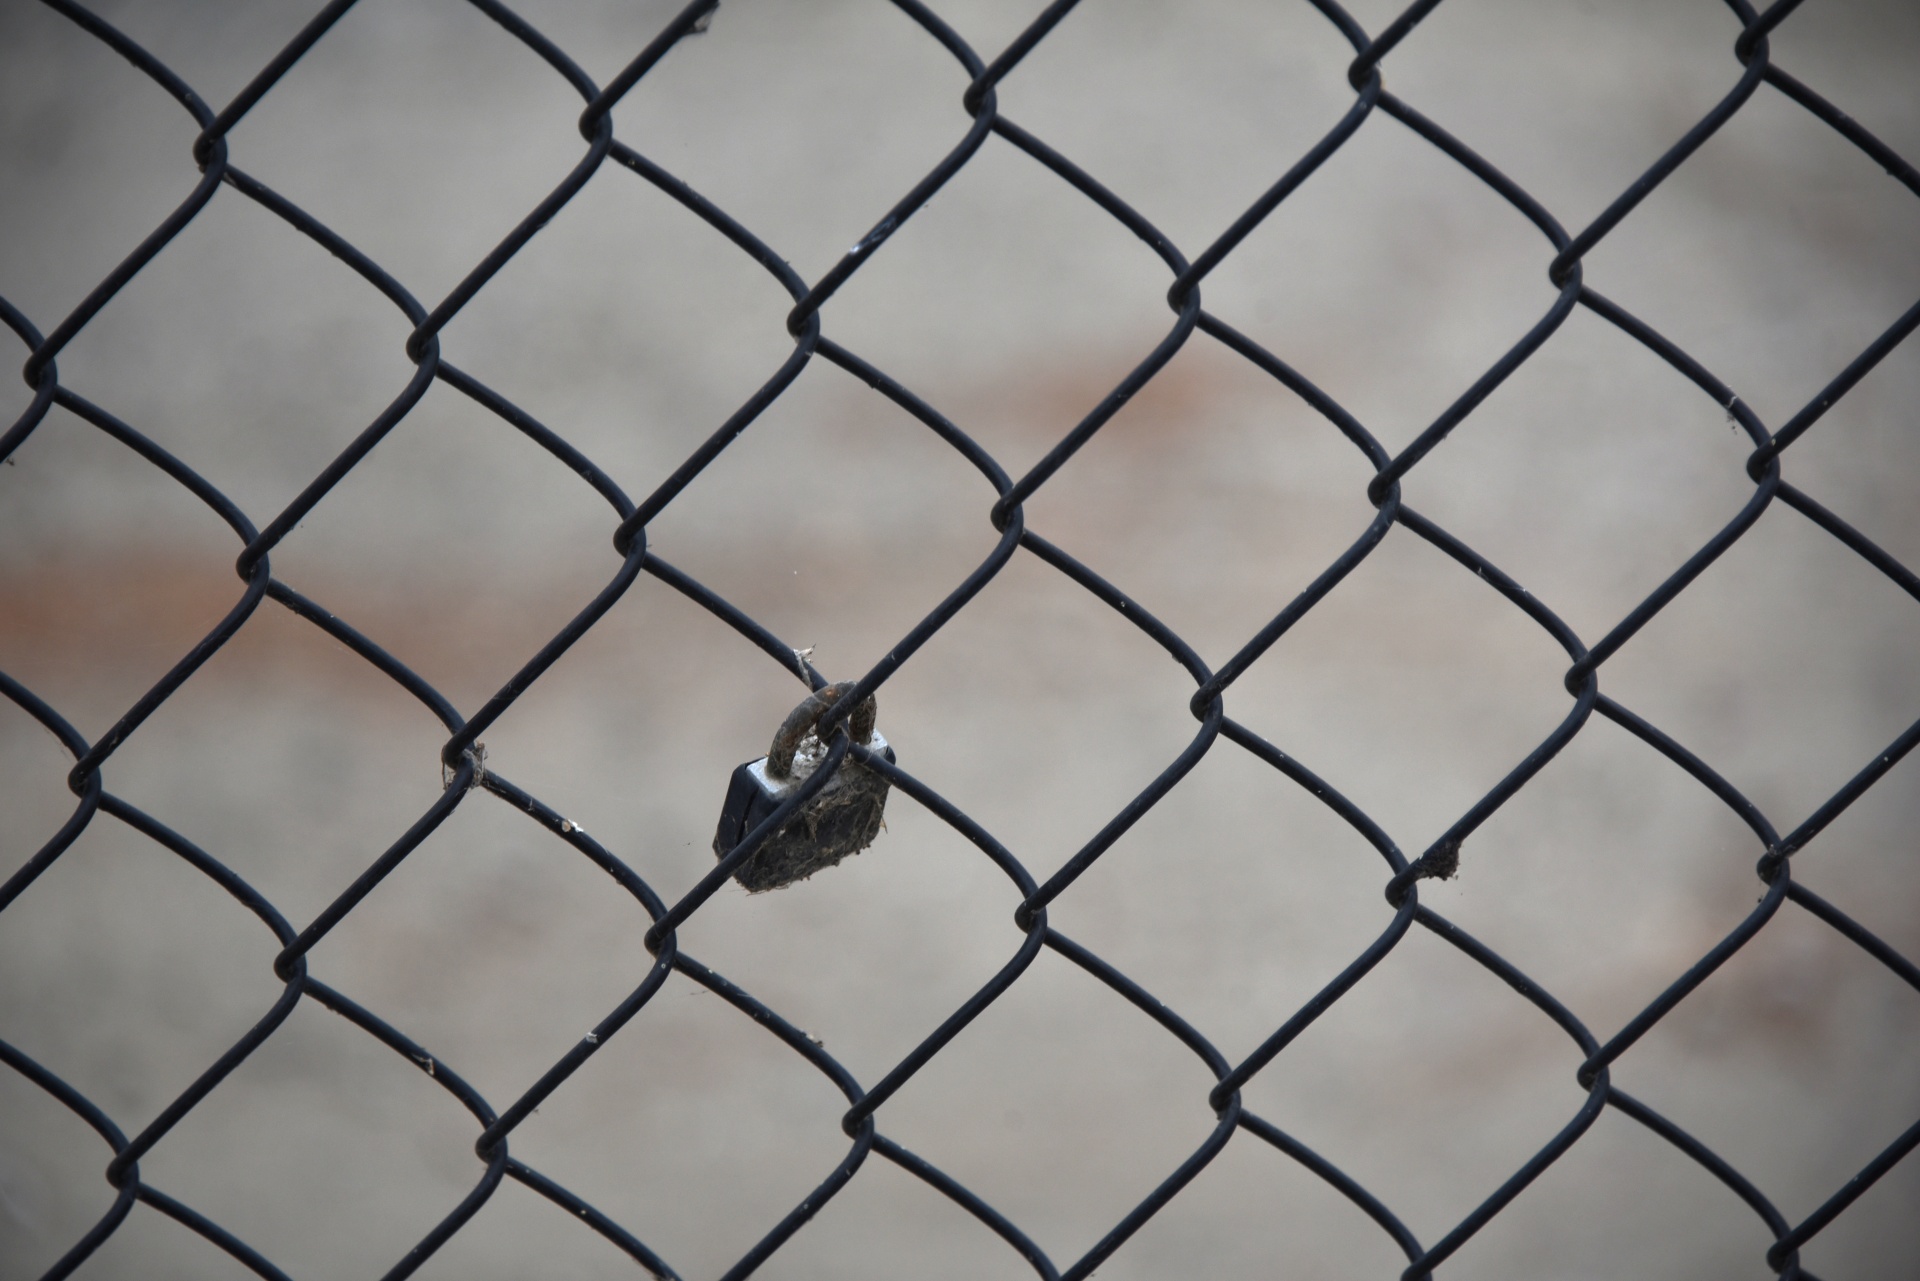 One lock fastened on a chain link fence.